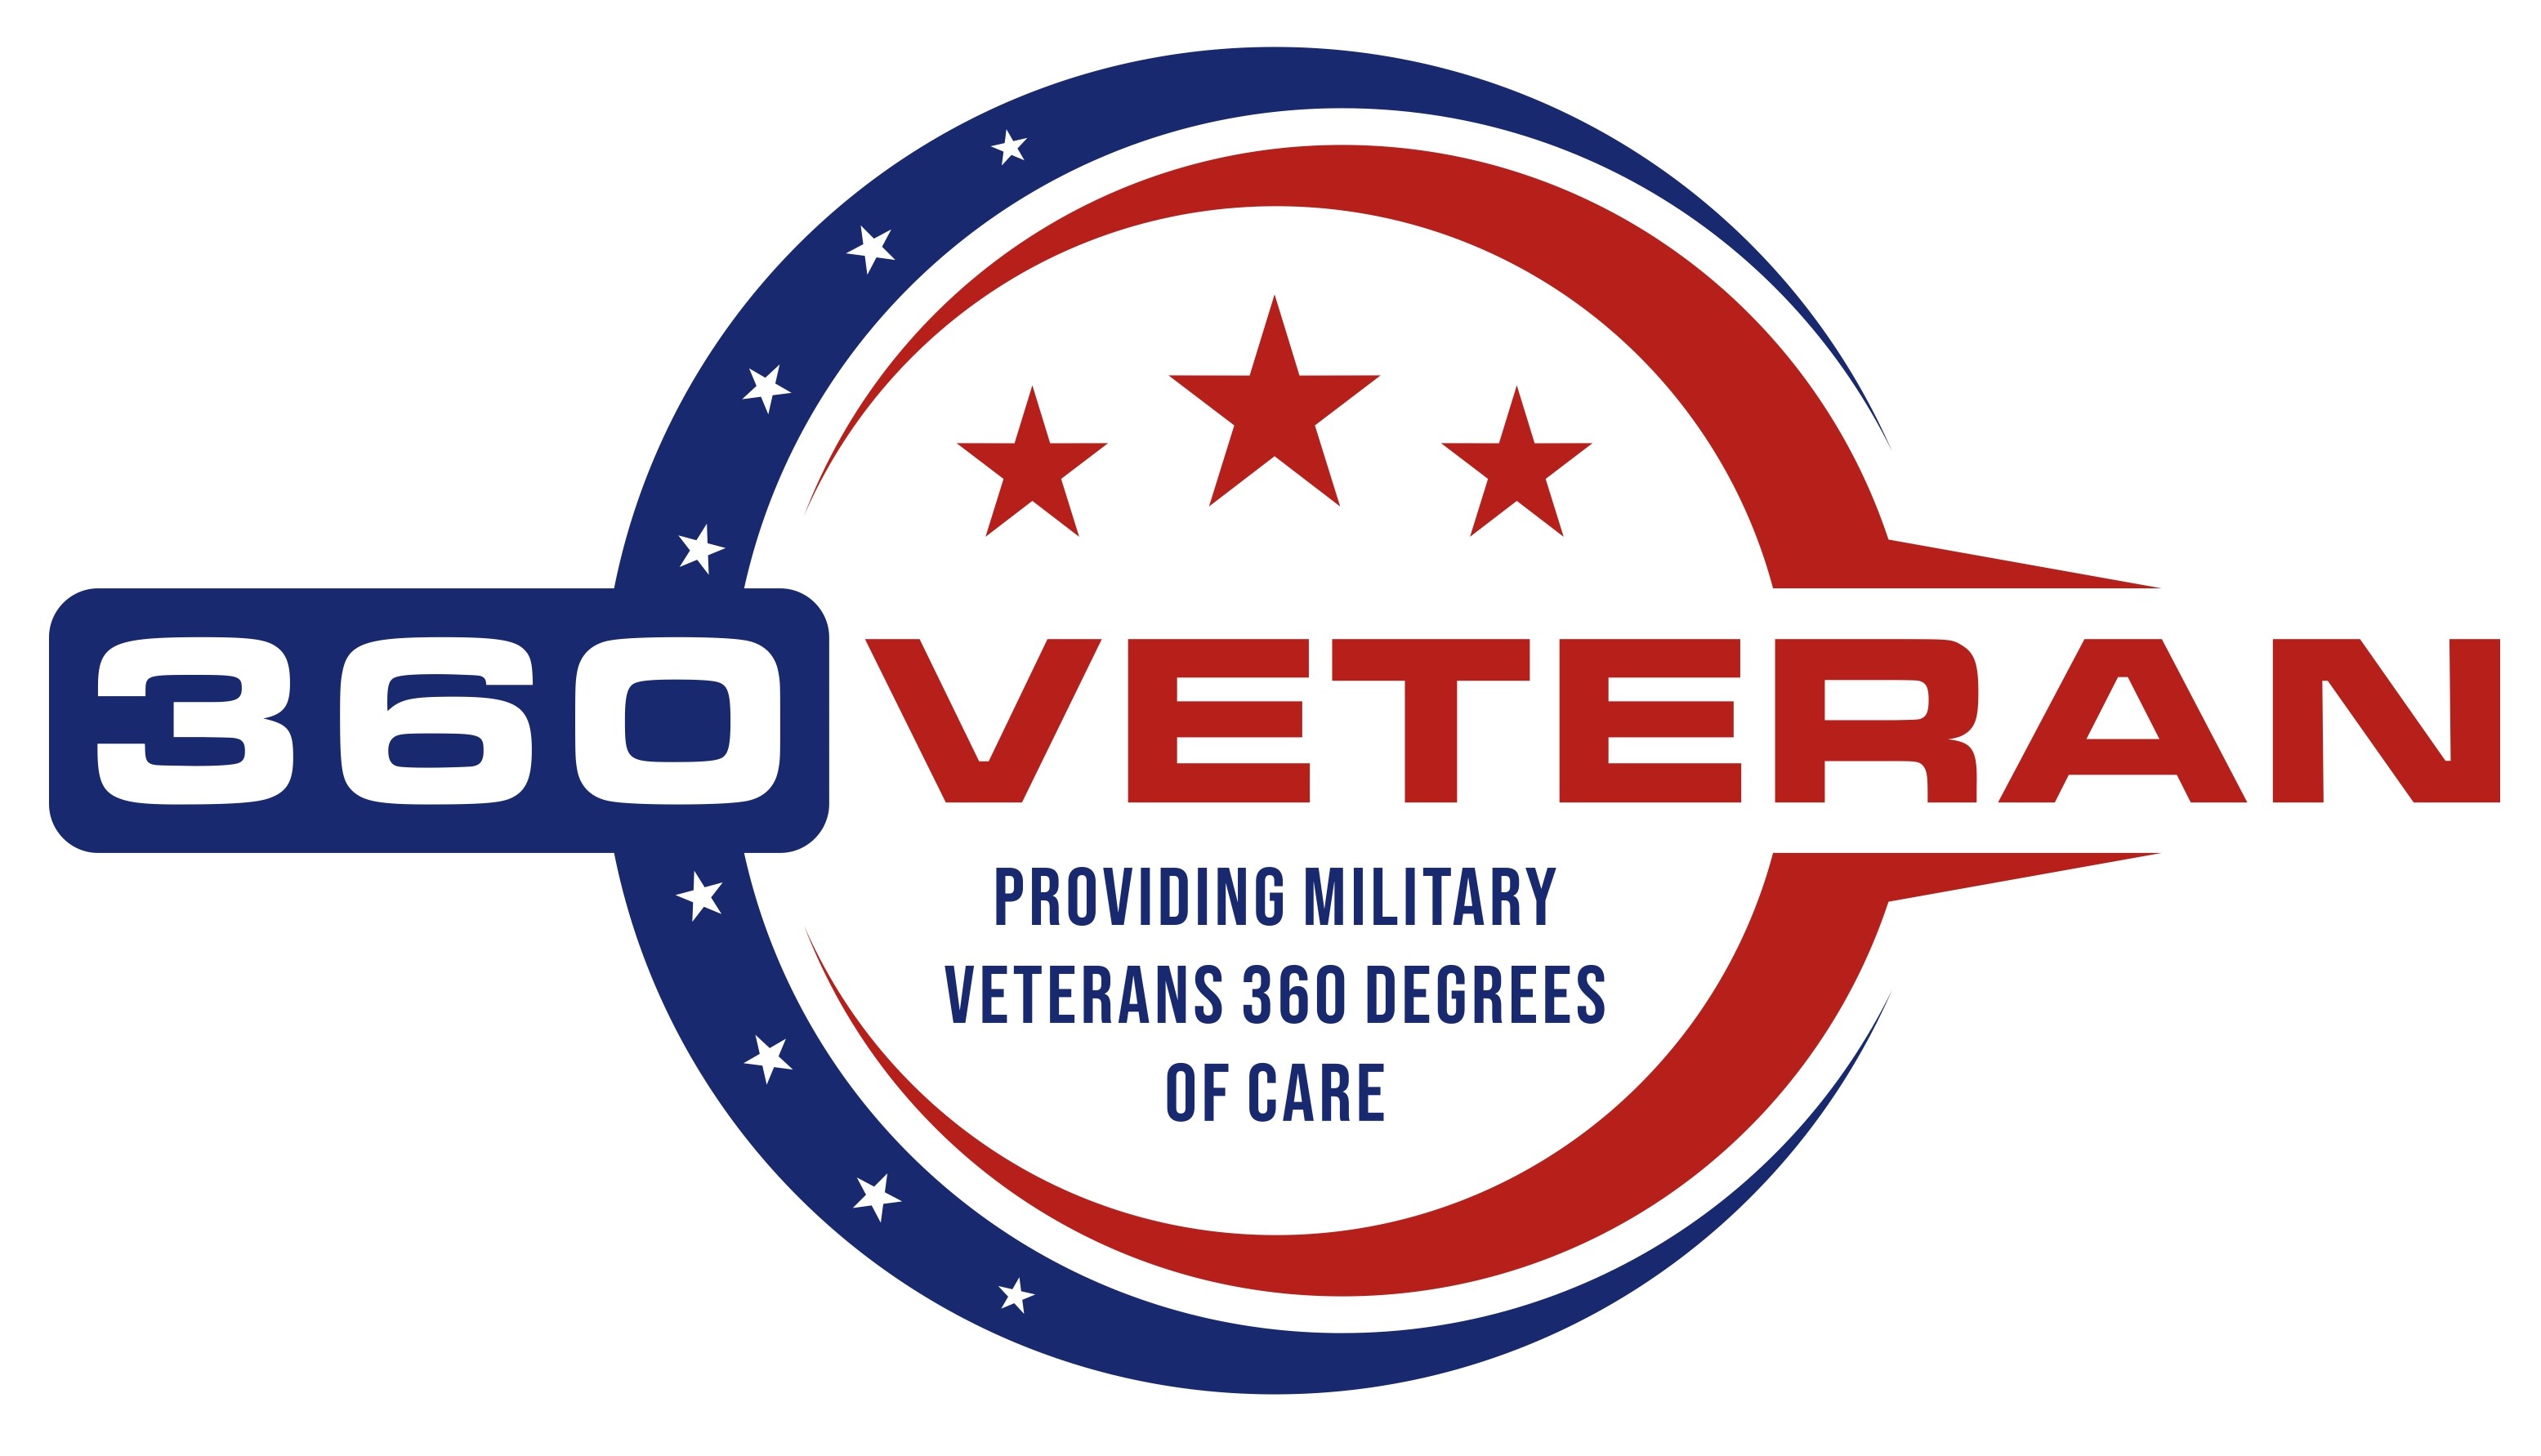 360 Veteran now Offers Support Across the Nation - Helping Veterans Increase Their Current VA Disability Rating